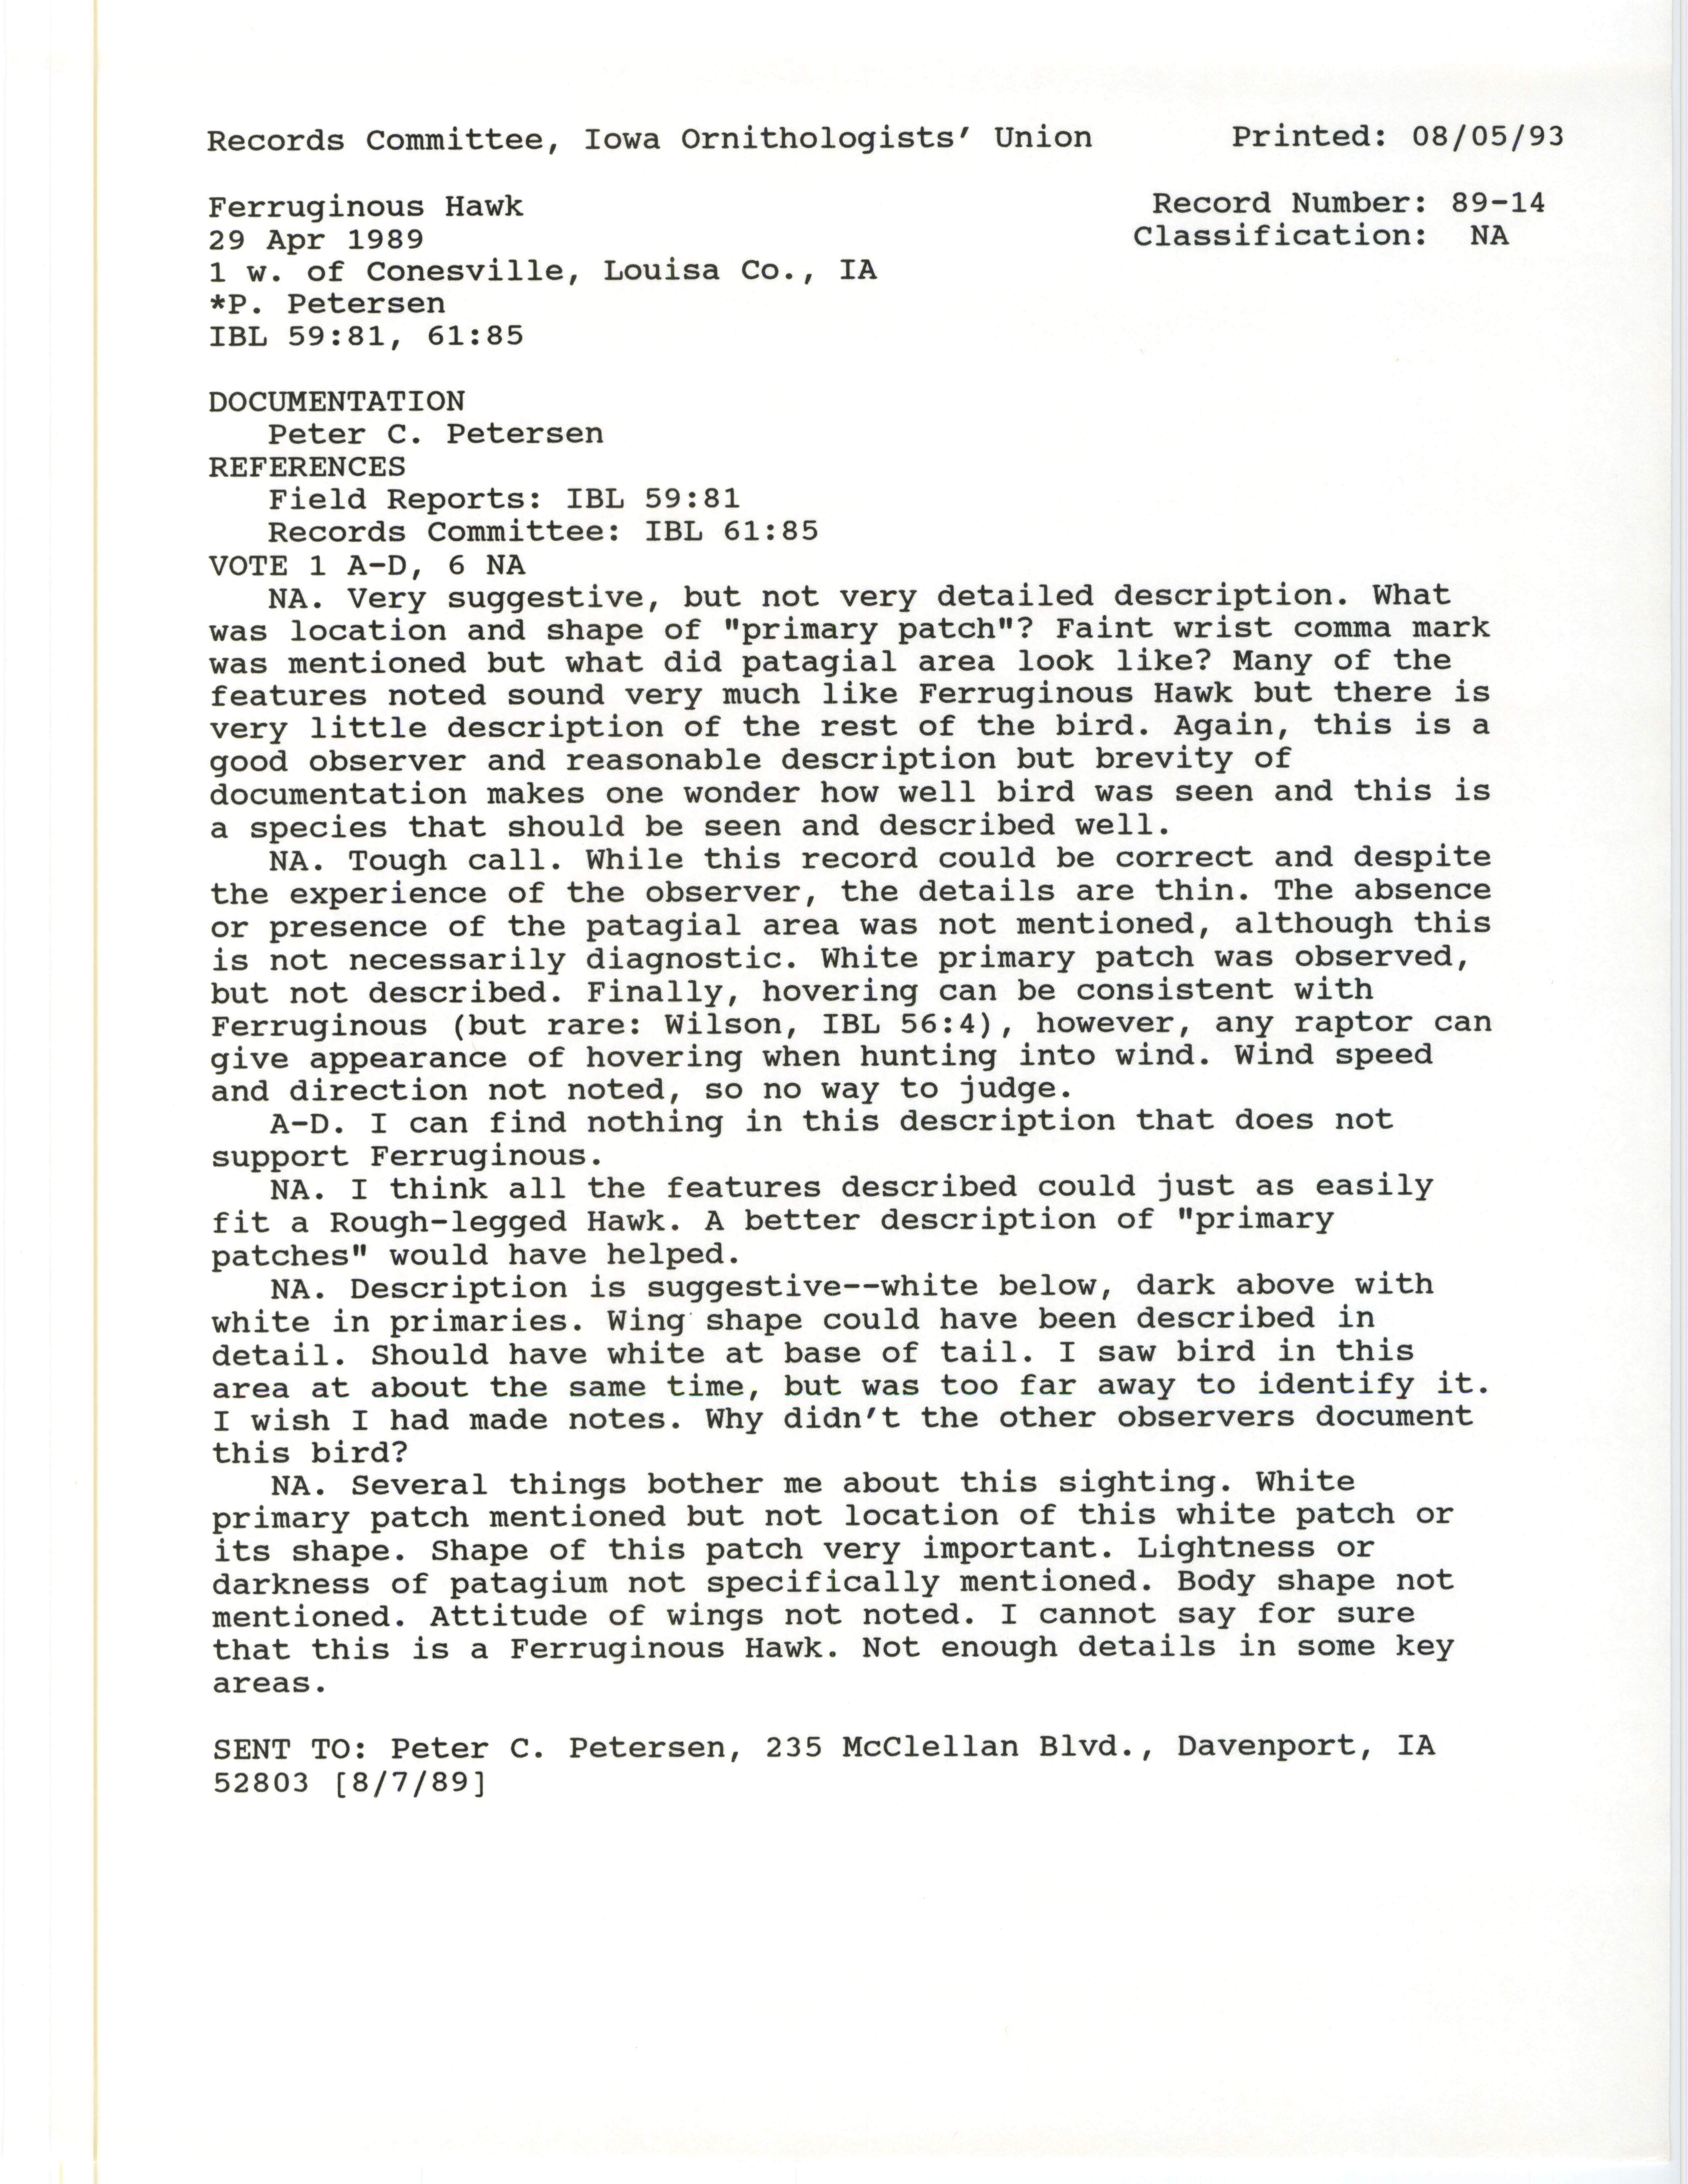 Record Committee review for rare bird sighting of Ferruginous Hawk west of Conesville, 1989